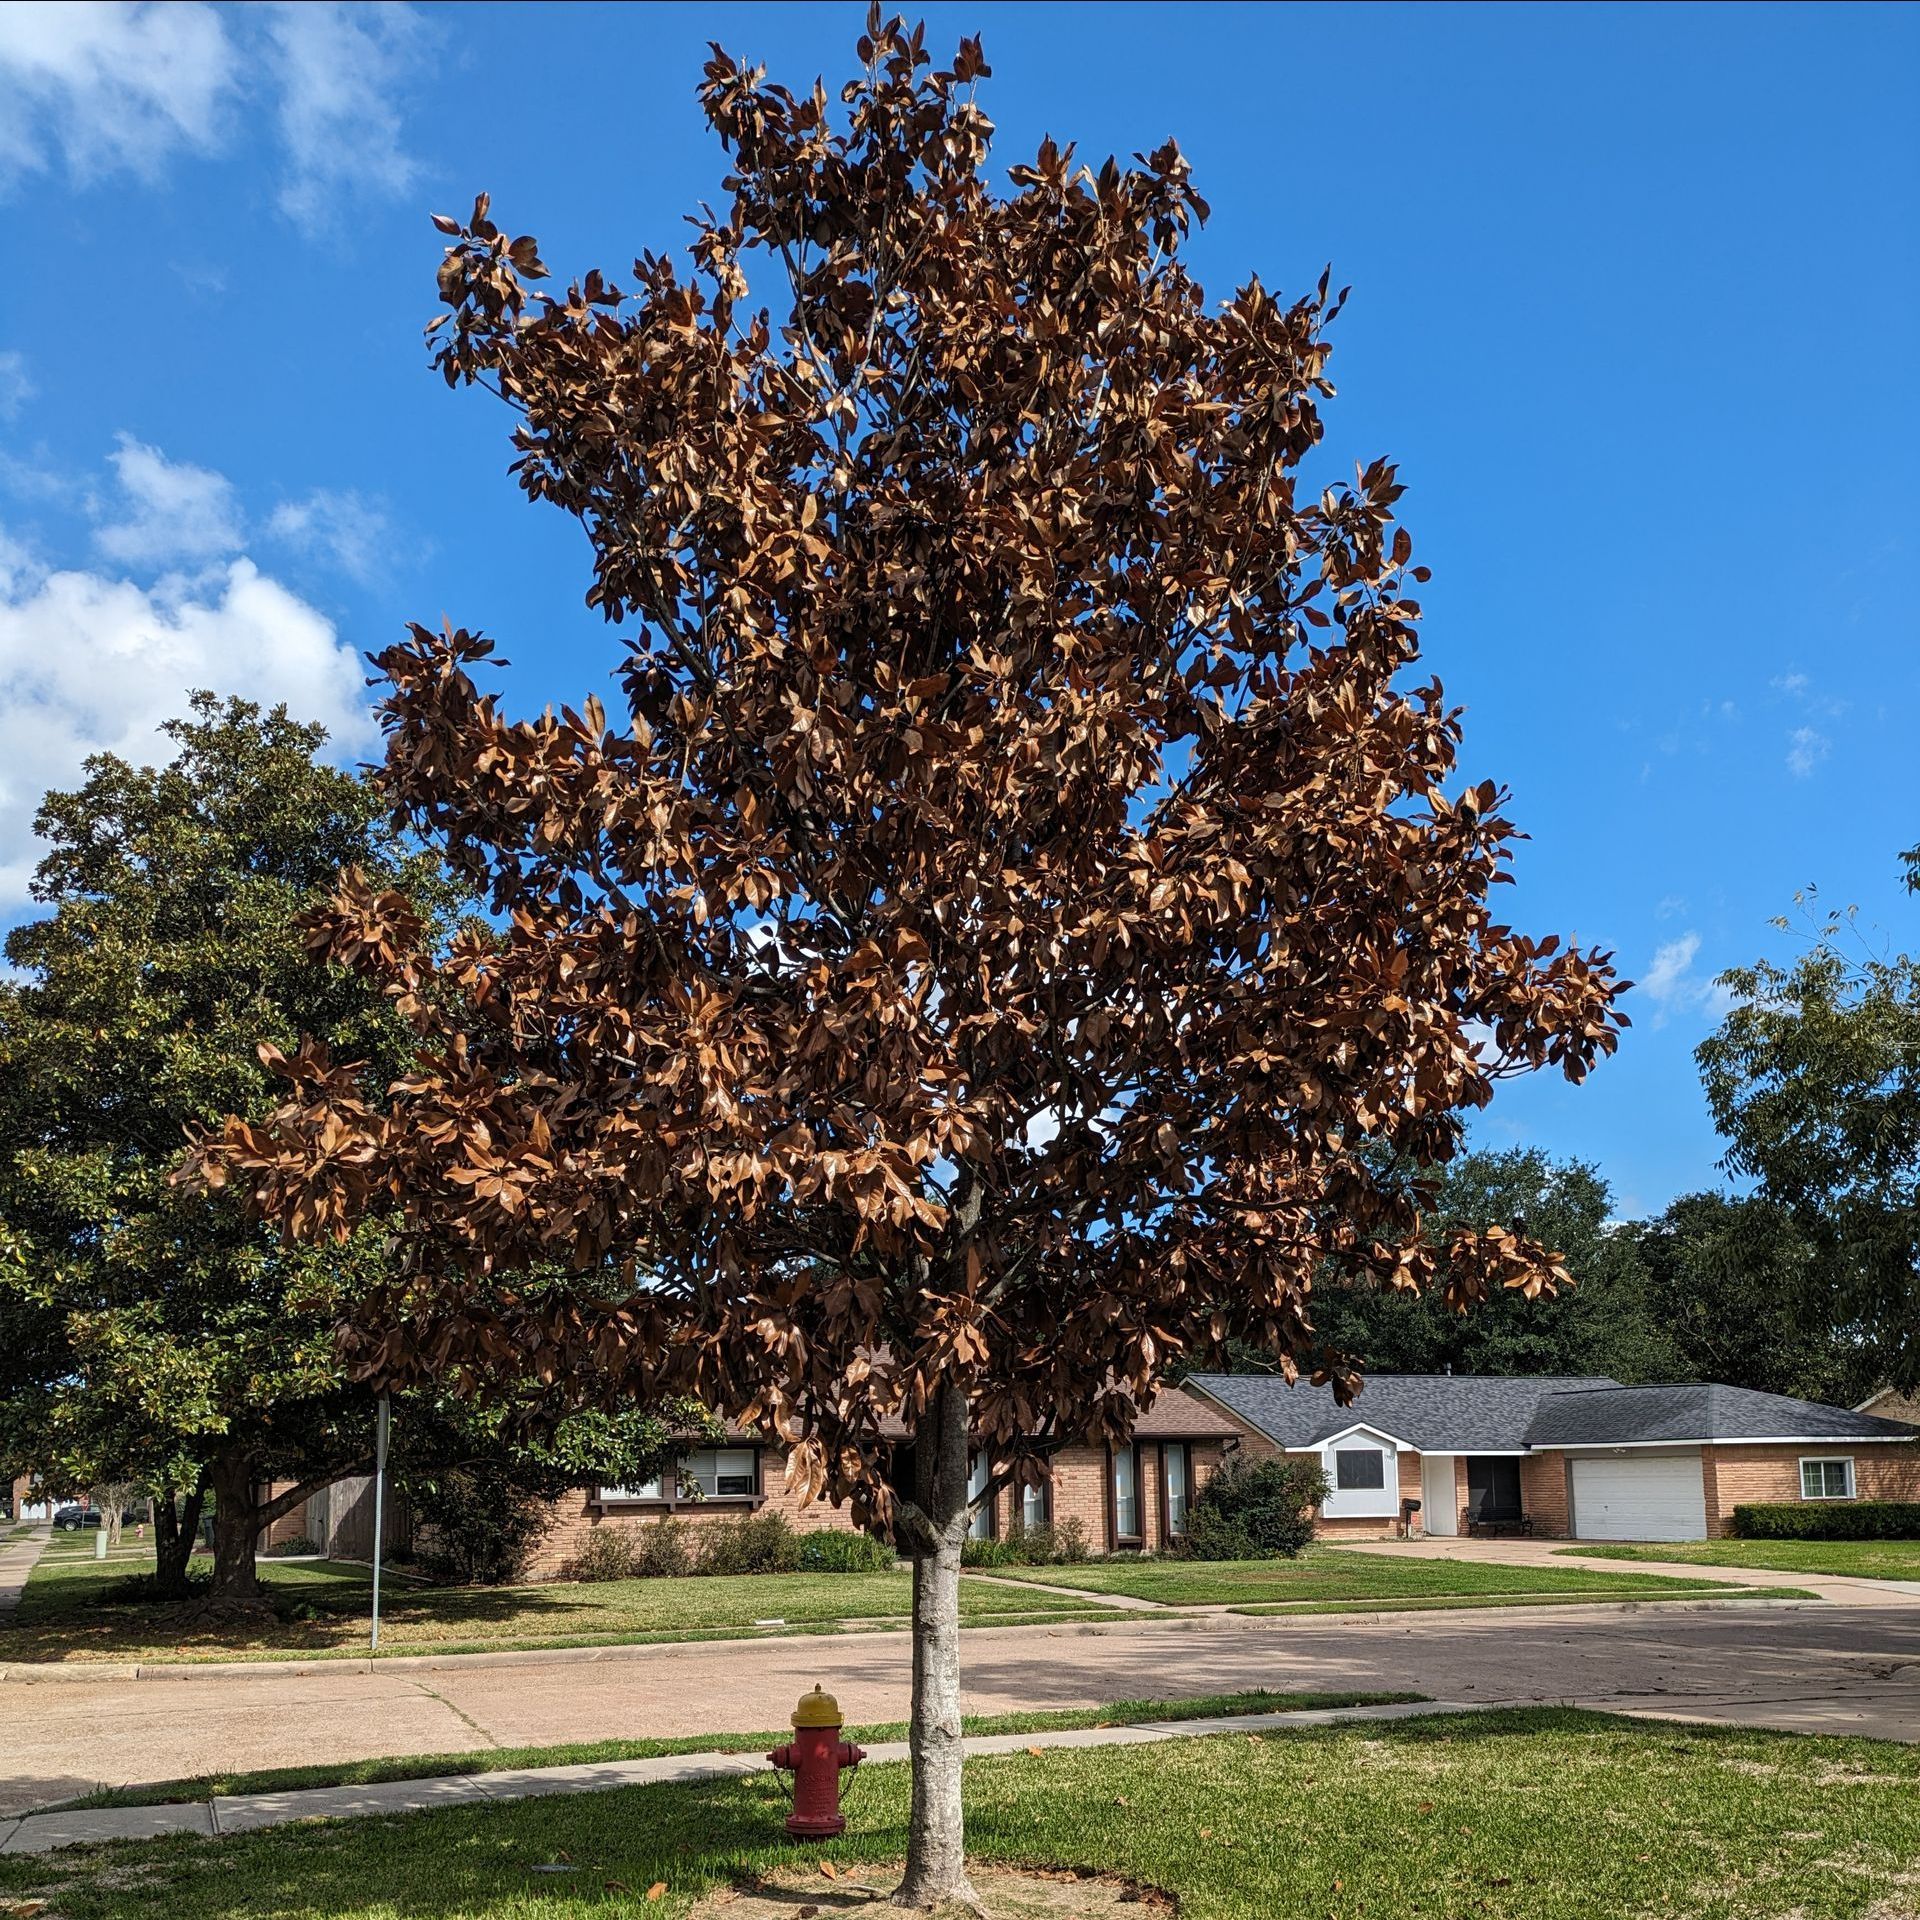 This photo is of a Magnolia Tree that has suffered many embolisms, resulting in the death of the tree and the flagging of the leaves.